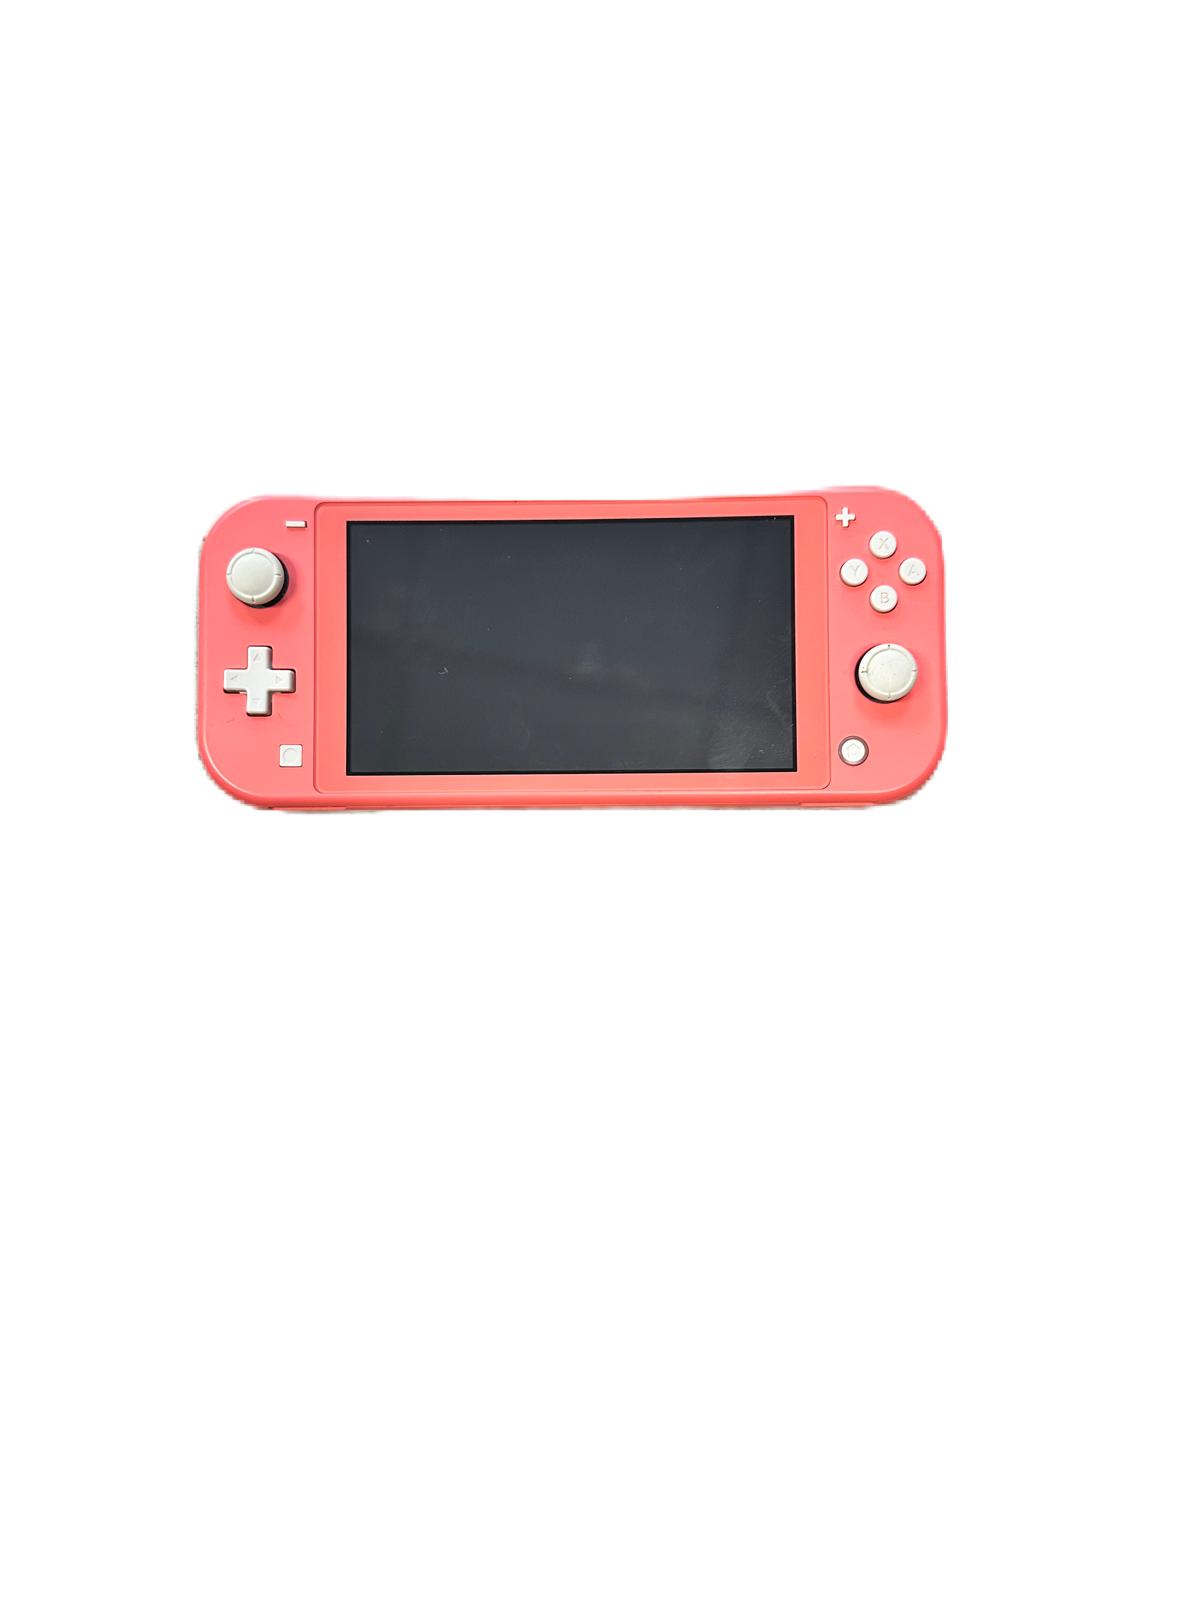 Nintendo switch lite (Pink) Unboxed W/Charger 